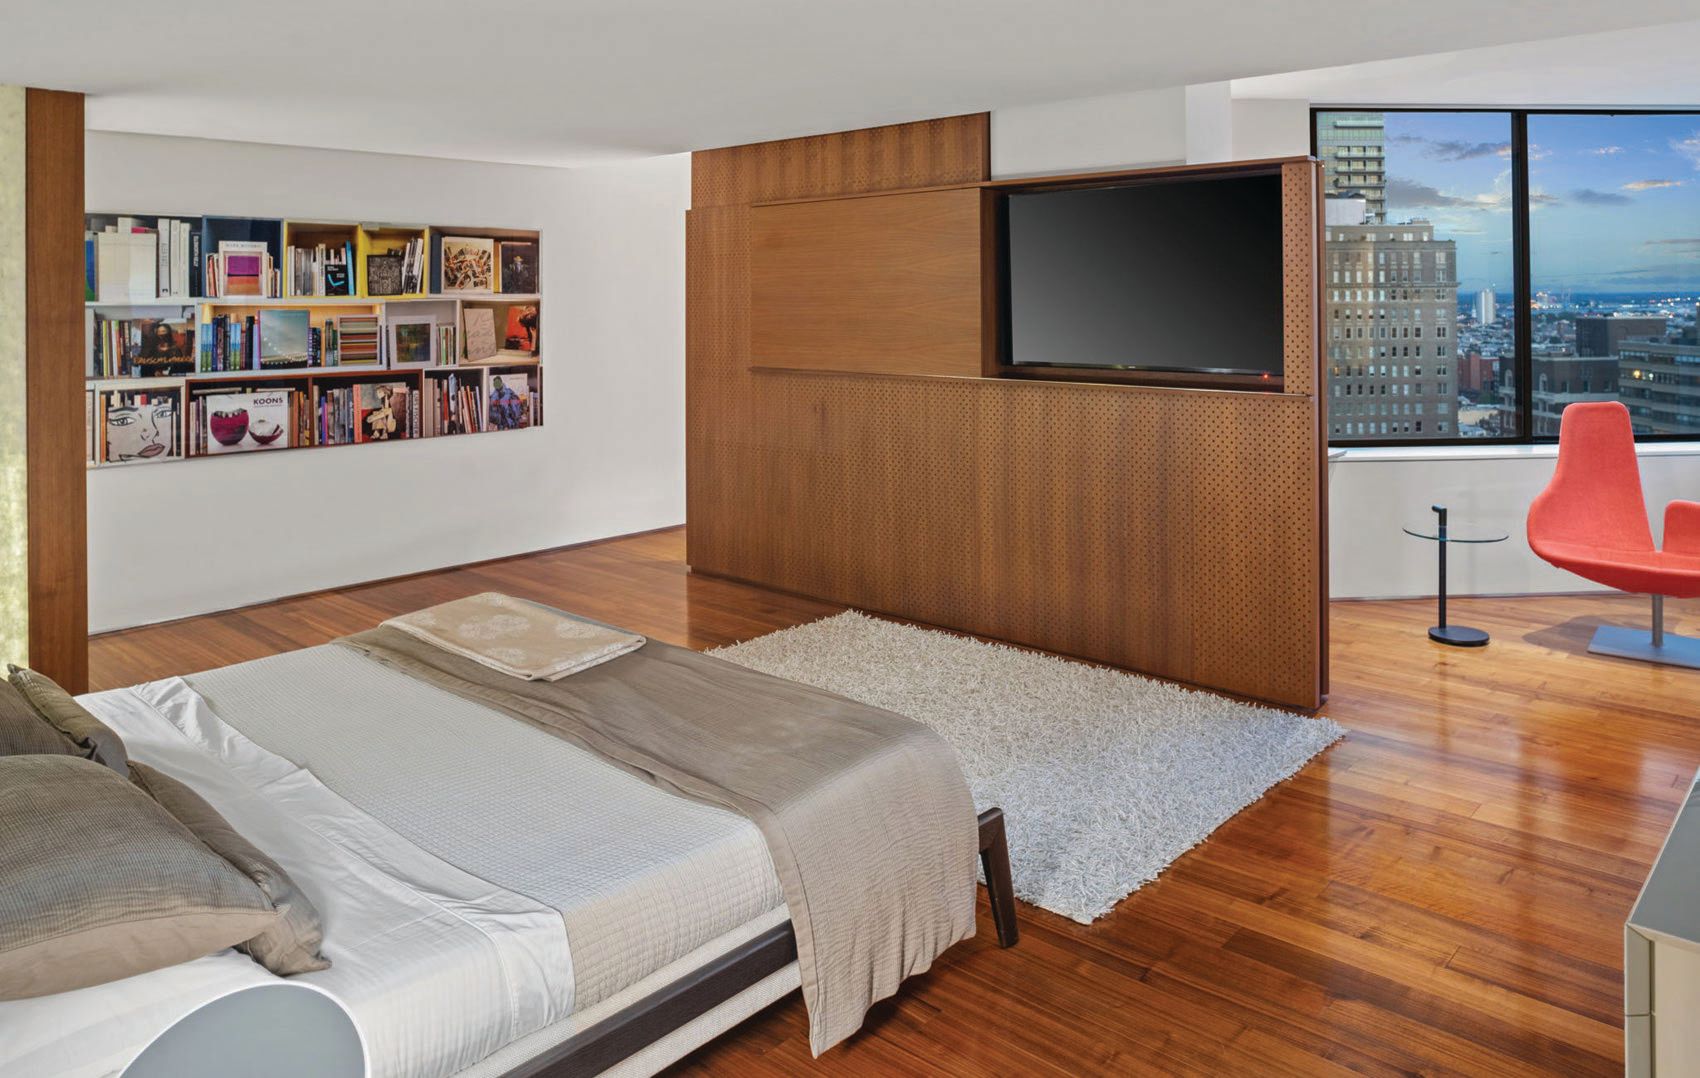 A perforated wood panel in the bedroom tucks a TV within PHOTO BY OM MEDIA